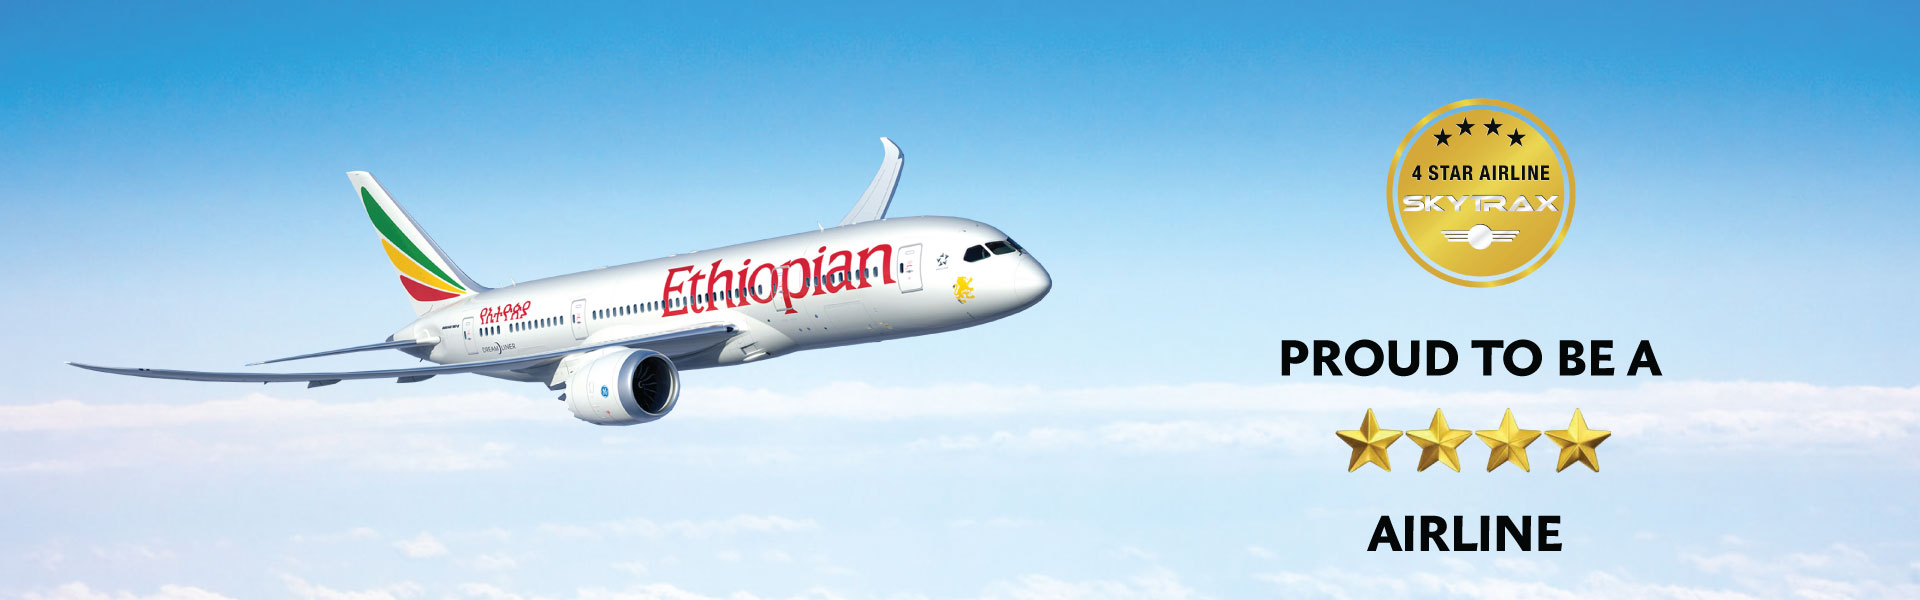 Ethiopian-Airlines SKYTRAX